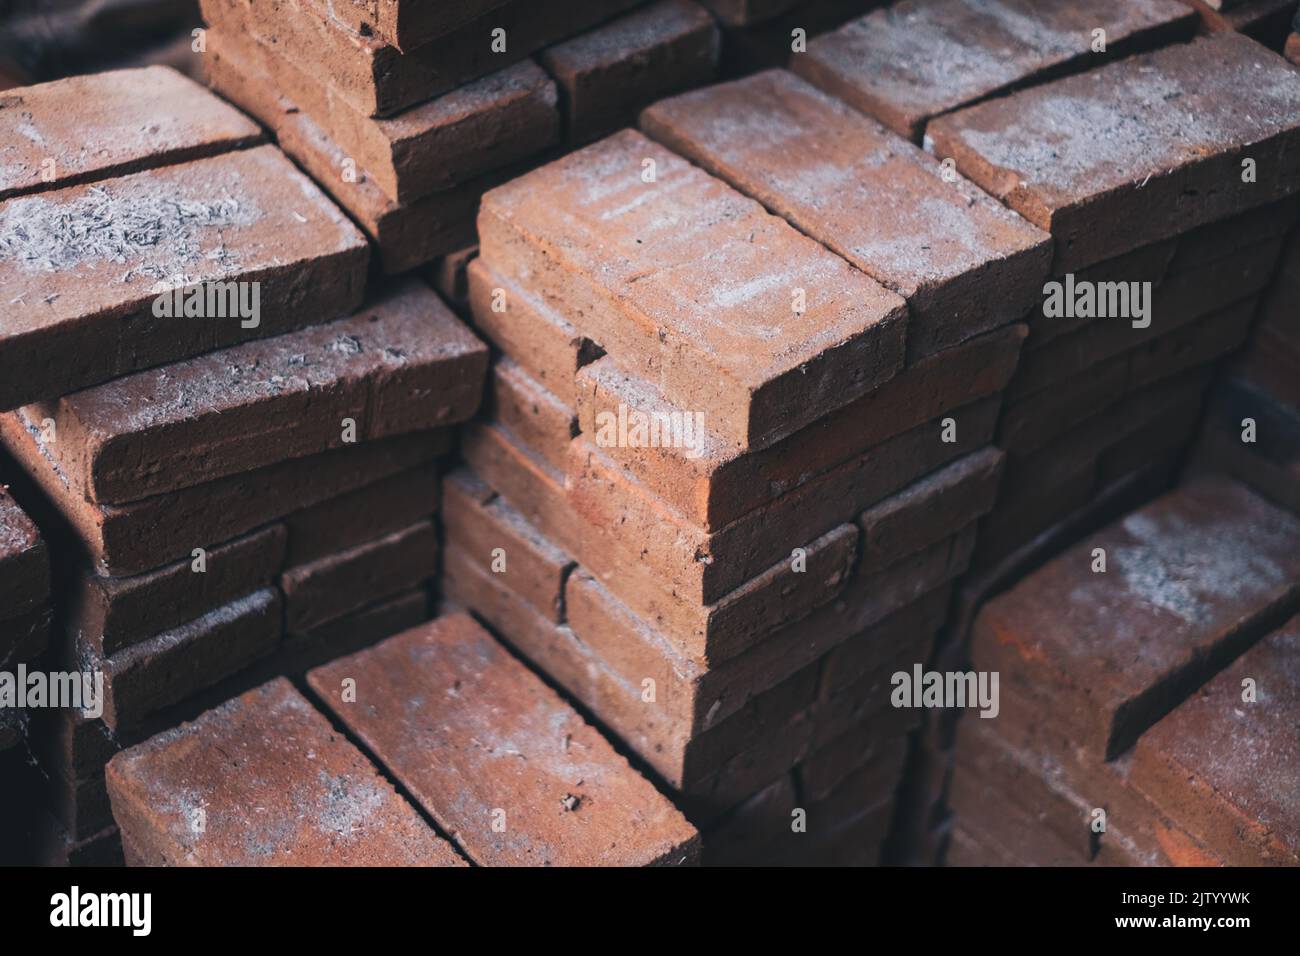 Stacks of newly made solid bricks made from clay (baked earth) used for landscaping, and other building and construction purposes. Selective focus. Stock Photo